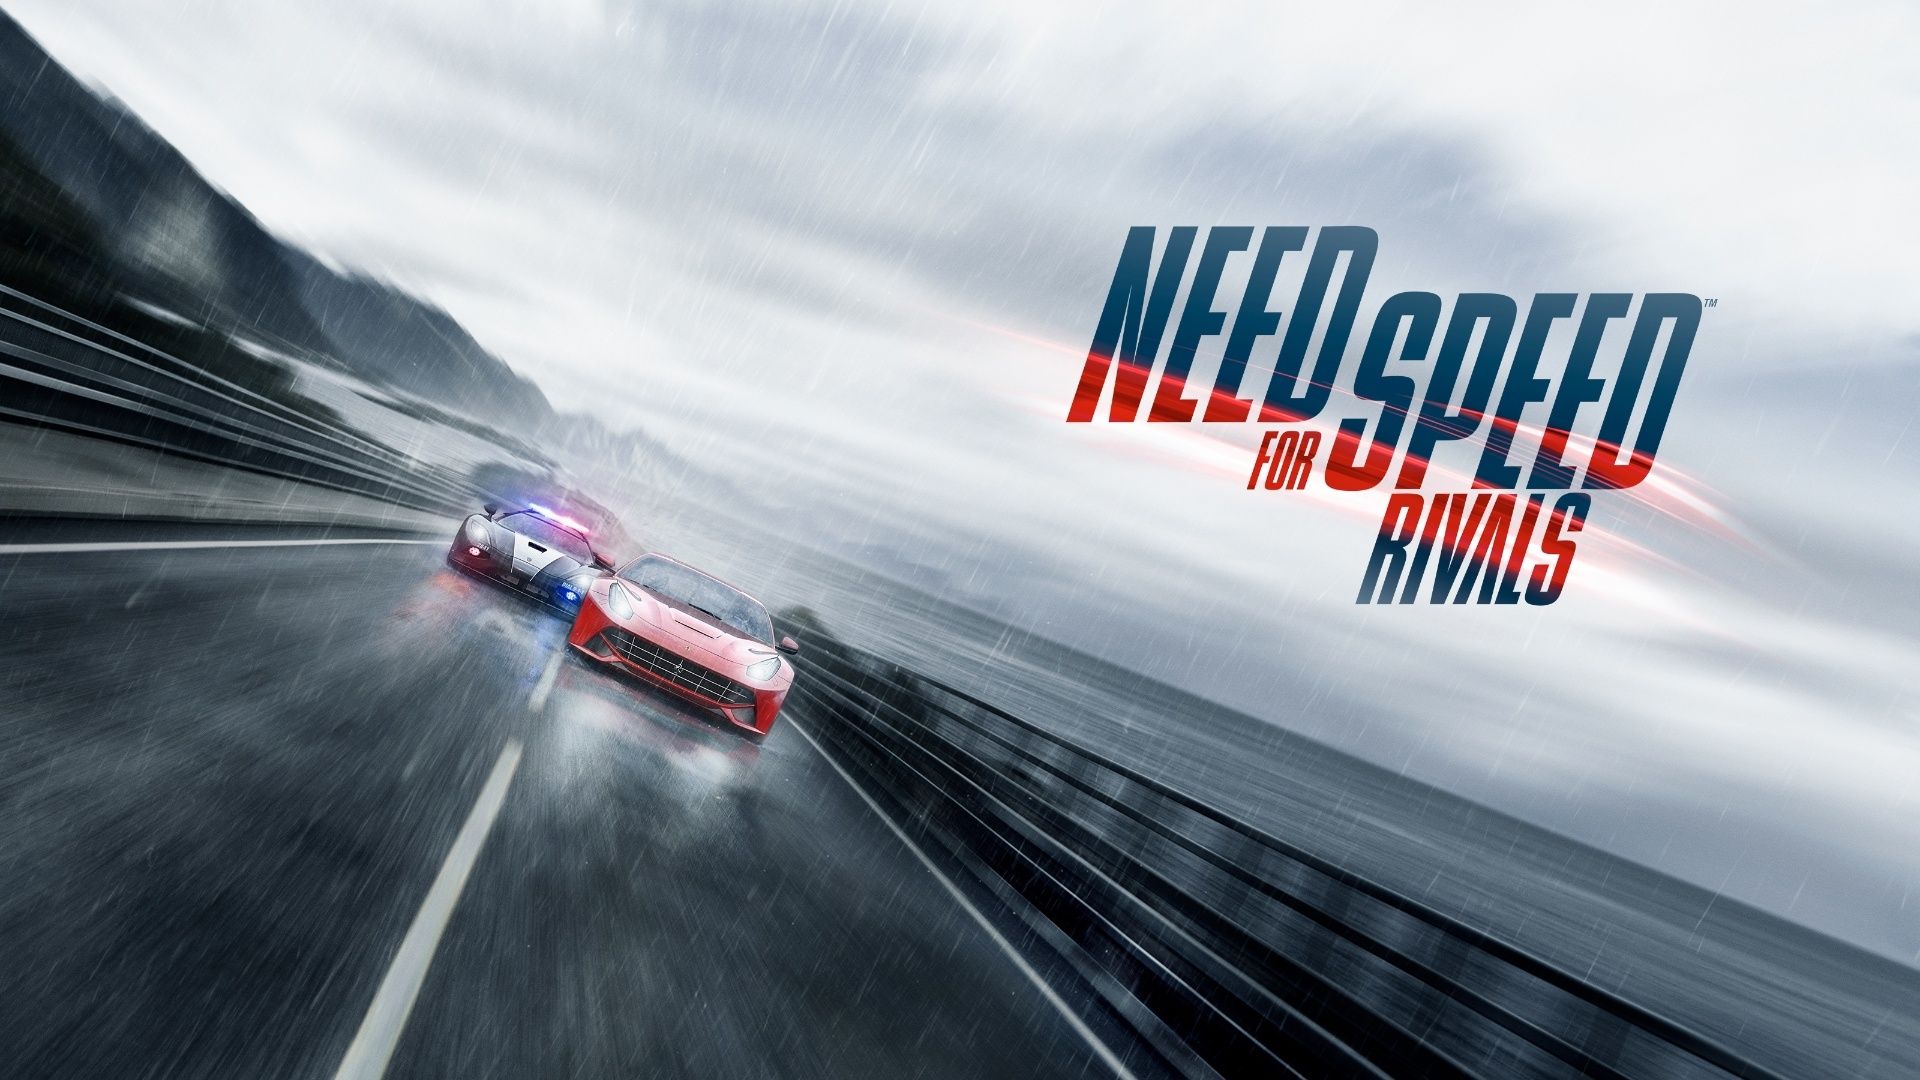 1920x1080 need for speed full hd background  Need for speed Speed Hd  wallpaper